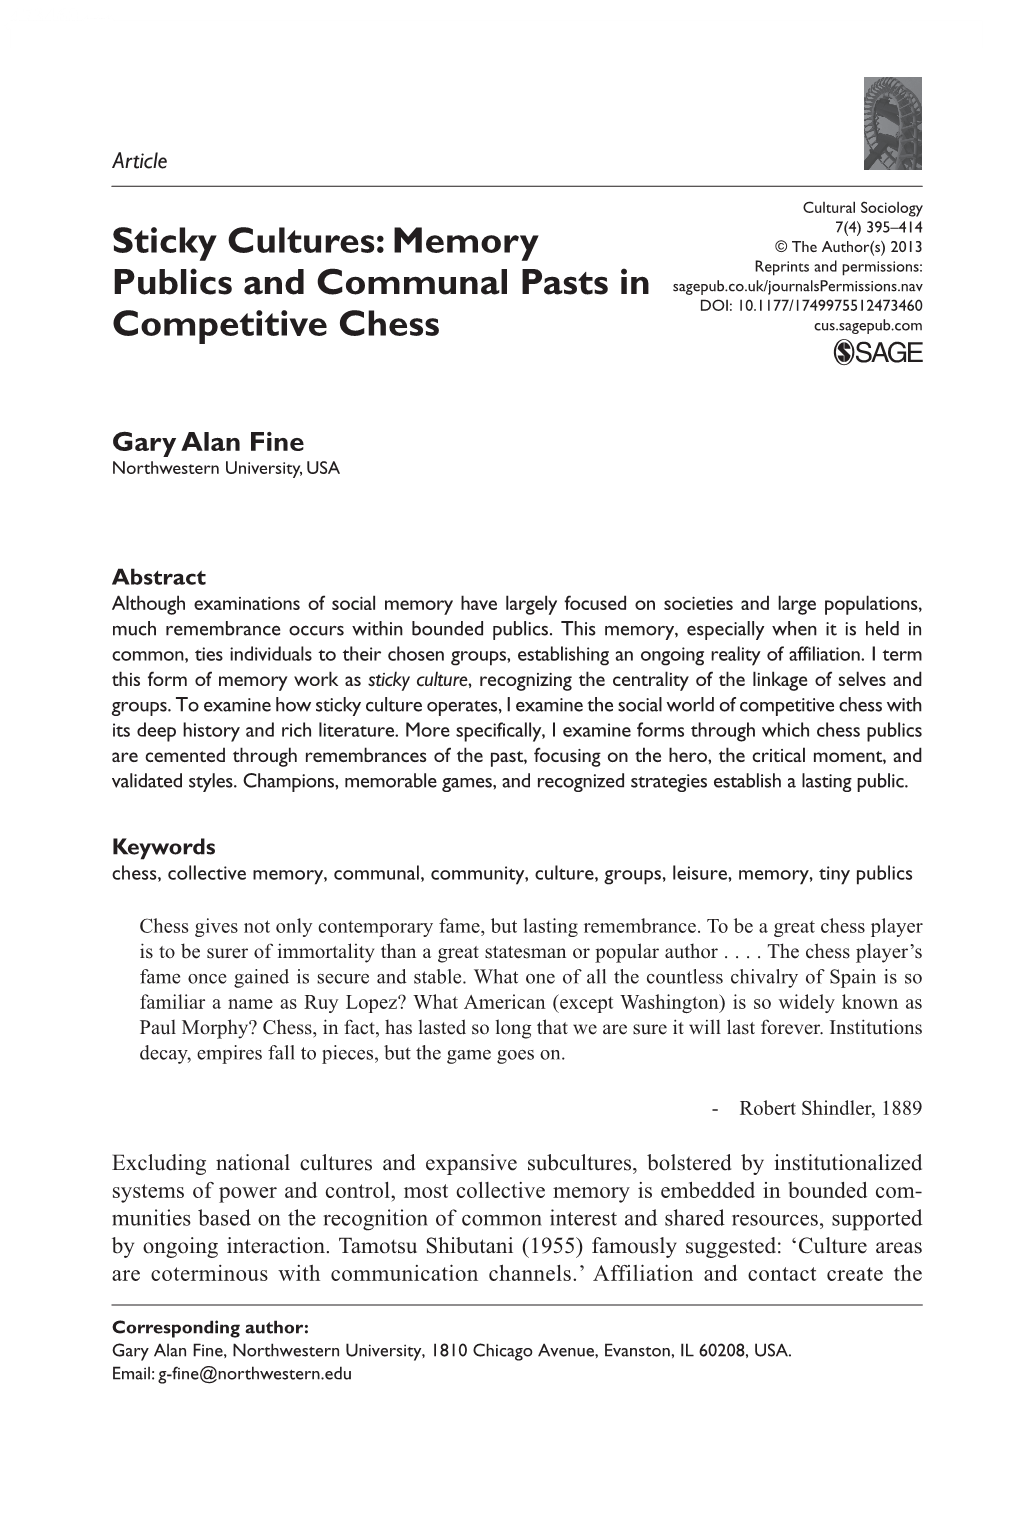 Sticky Cultures: Memory Publics and Communal Pasts in Competitive